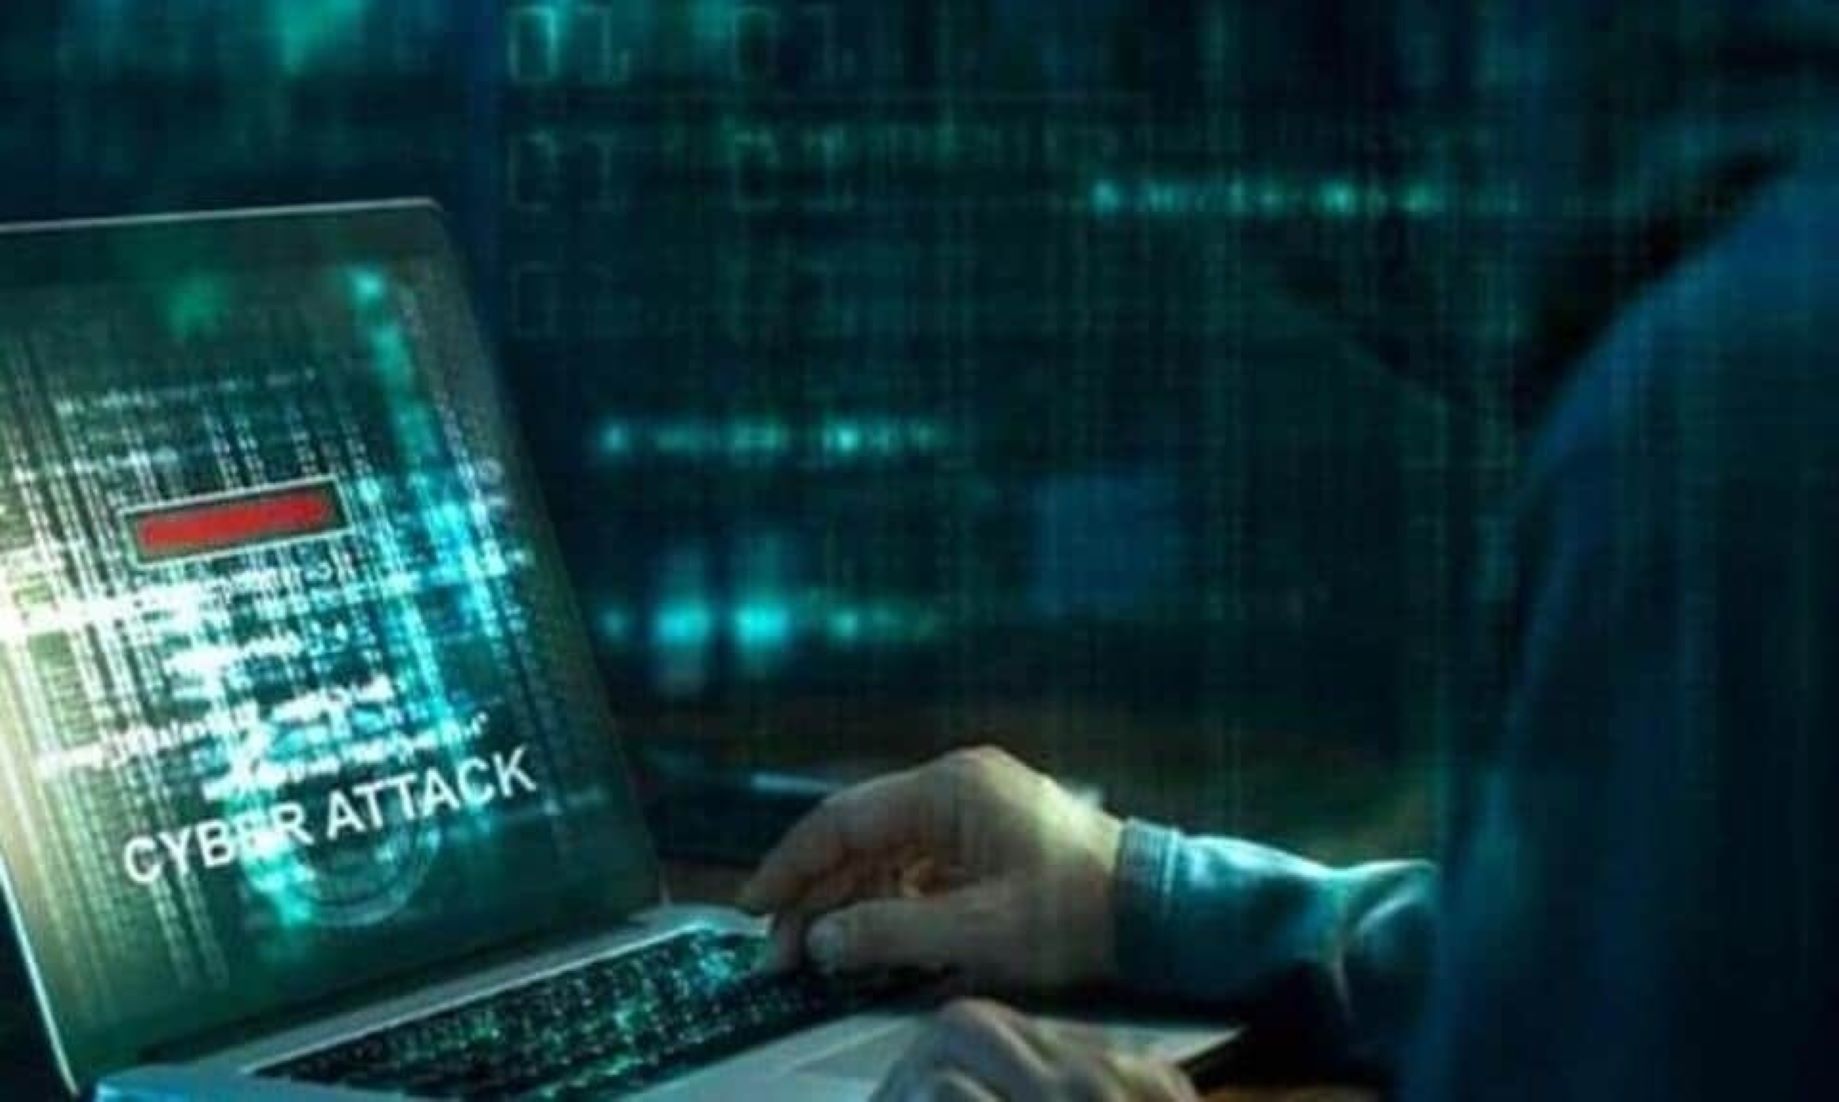 14 Million Personal Documents Stolen From Aussie Financial Firm In Cyber Attack